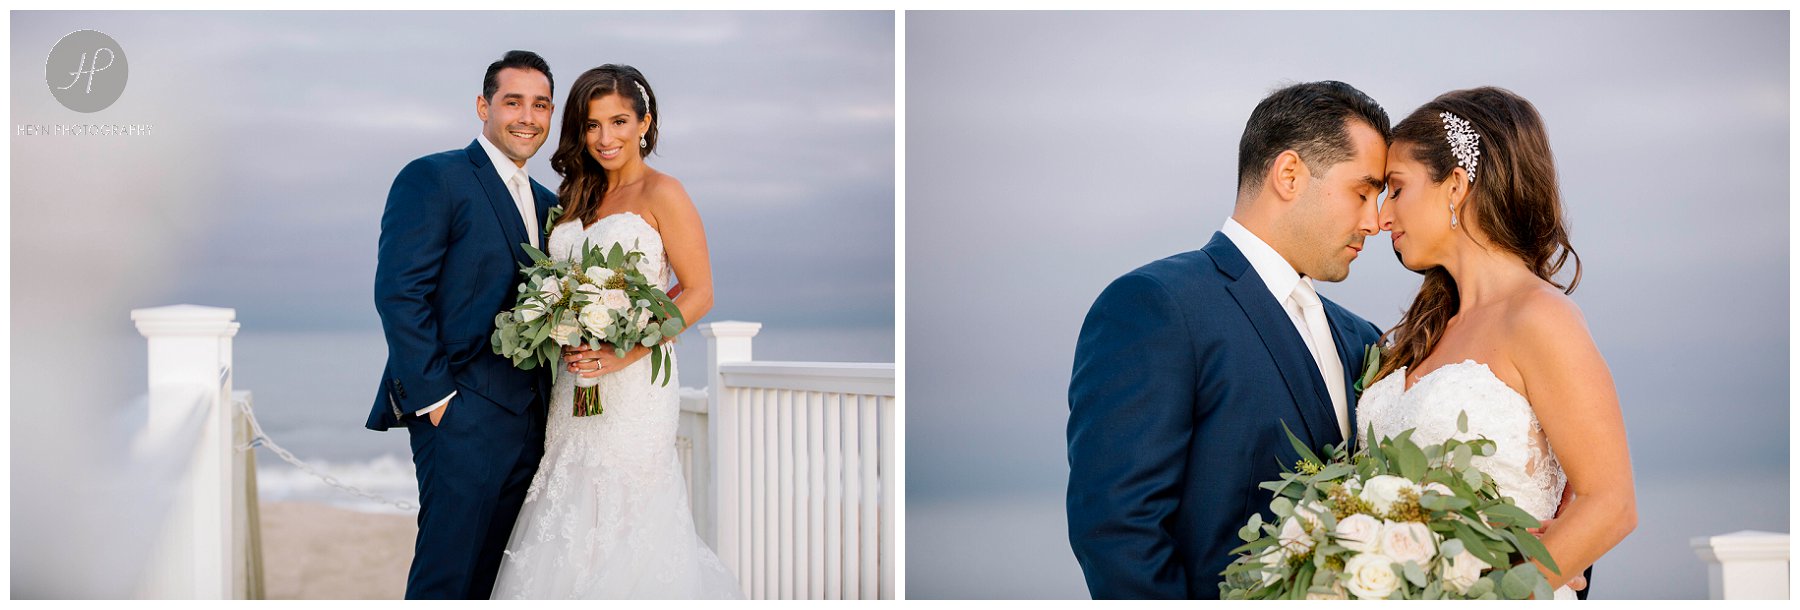 bride and groom at sunset at edgewater beach club wedding in new jersey